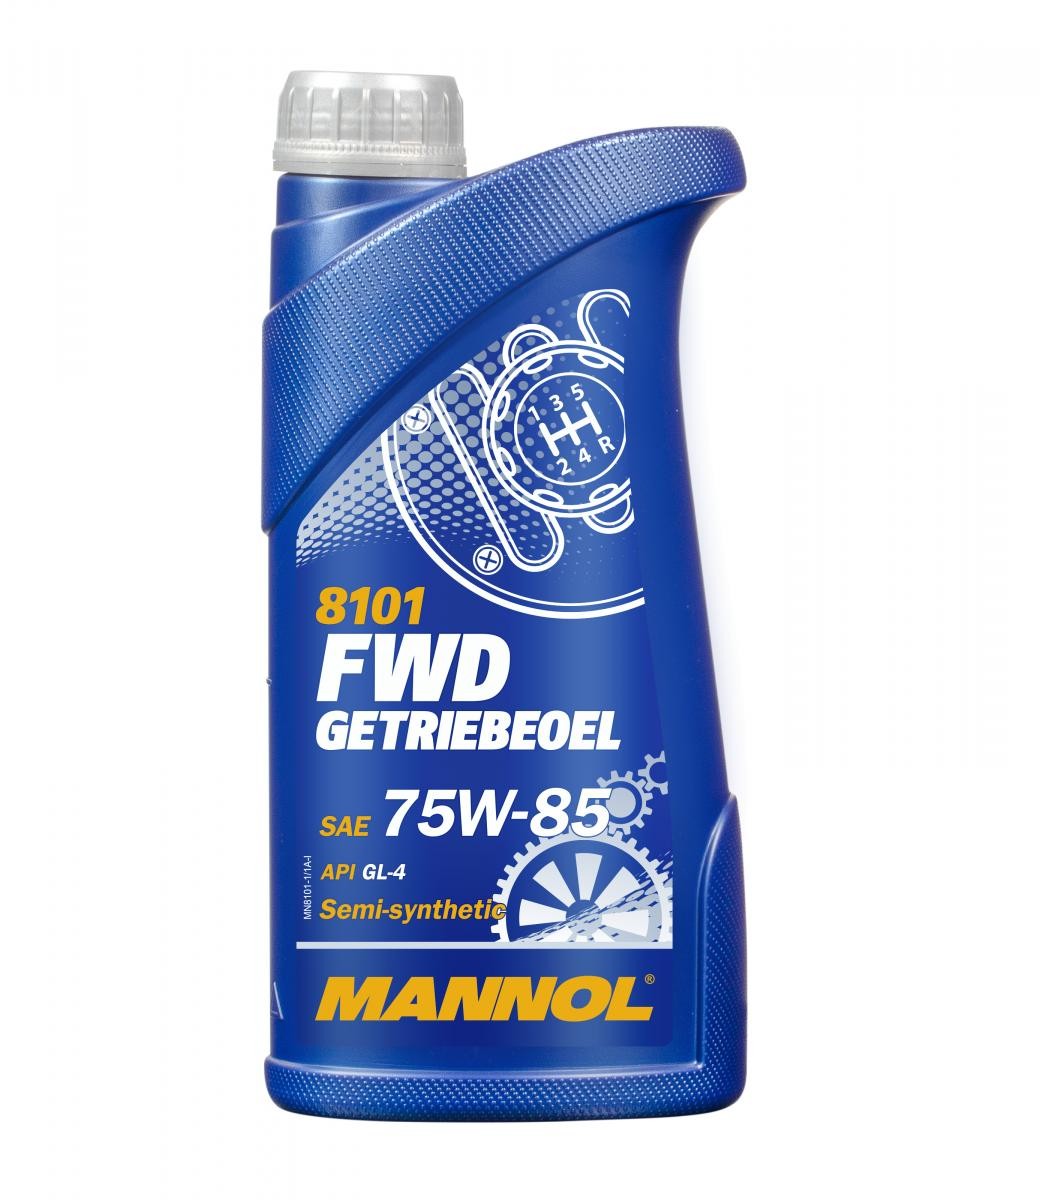 MANNOL FWD MN81011 Gearbox oil and transmission oil OPEL Insignia A Saloon (G09) 2.8 V6 Turbo 4x4 (69) 260 hp Petrol 2017